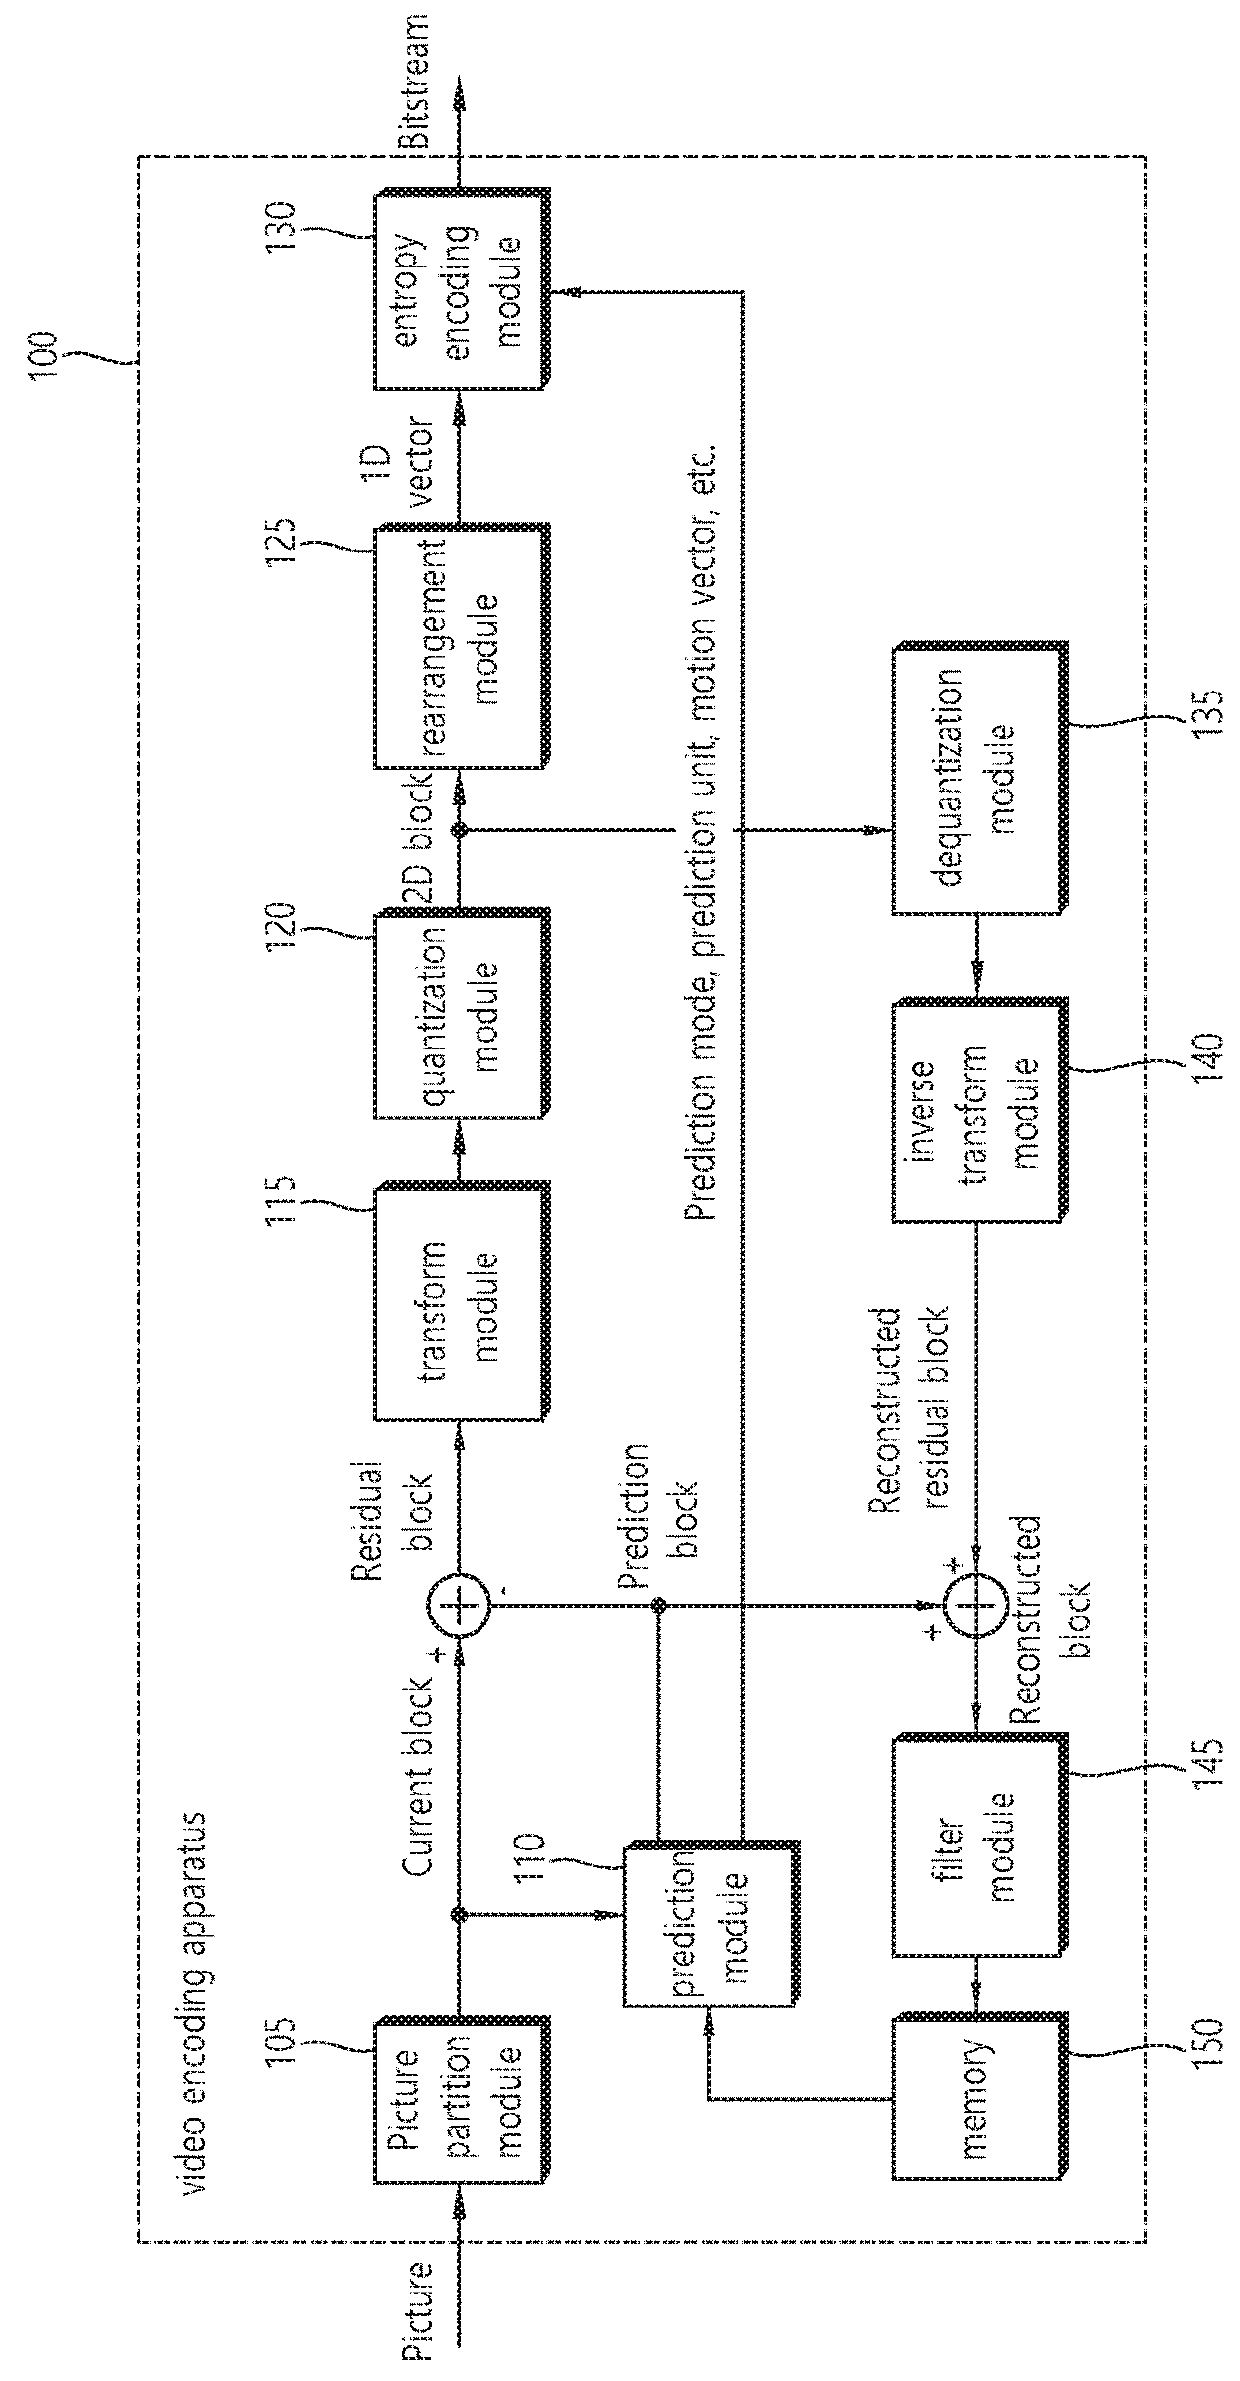 Amvr-based image coding method and apparatus in image coding system